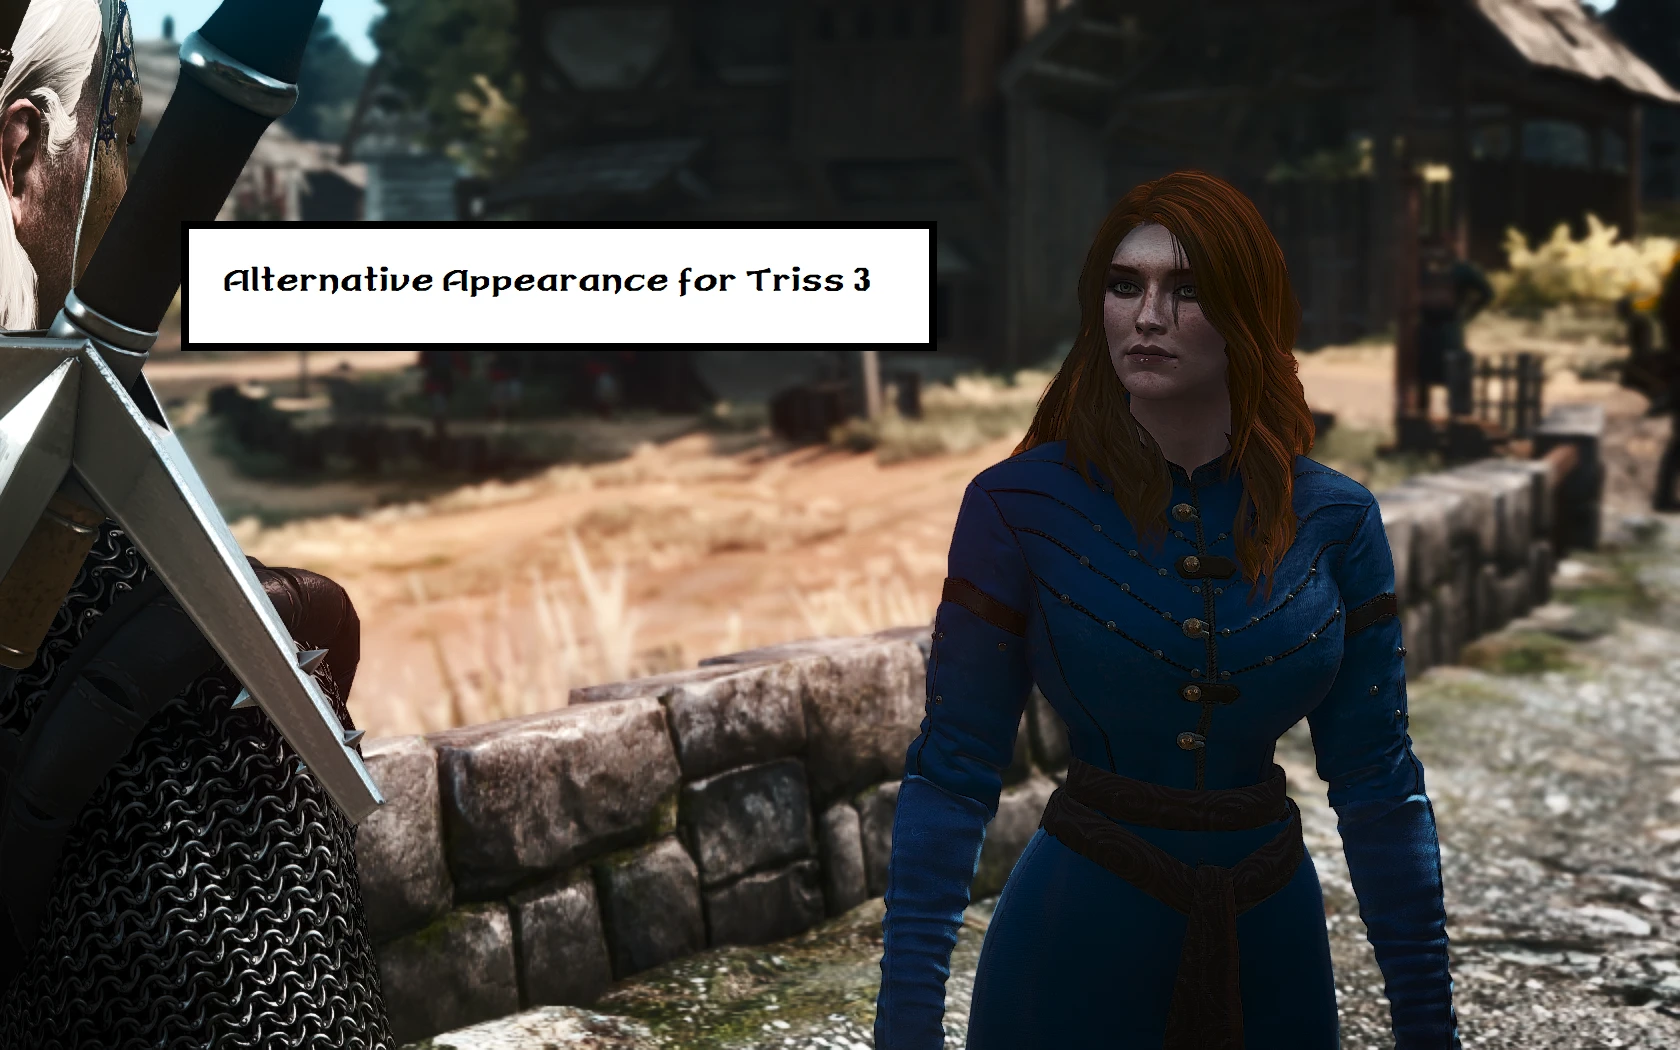 Alternative Outfits and Appearance for Triss (Sapkowski 